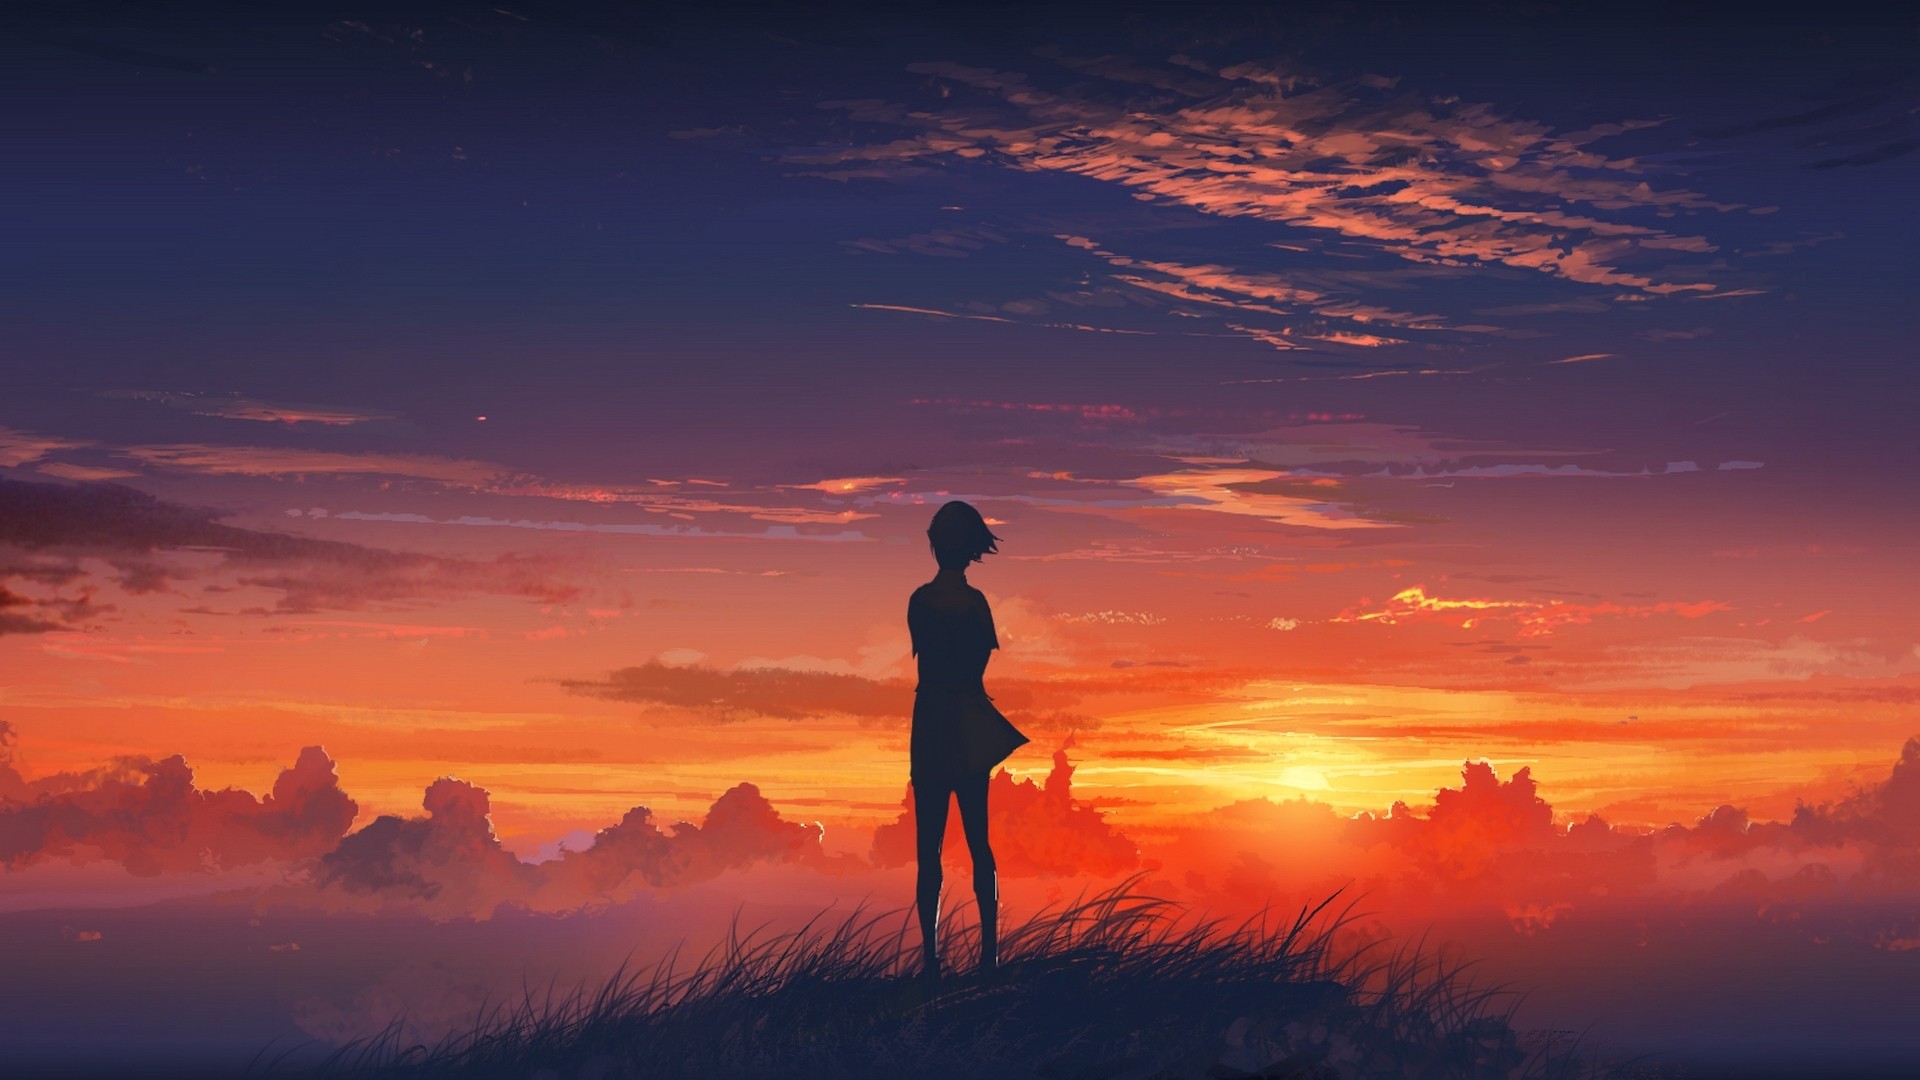 Wallpaper, sunlight, sunset, anime, silhouette, sunrise, evening, horizon, atmosphere, dusk, cloud, mountain, dawn, afterglow, red sky at morning 1920x1080